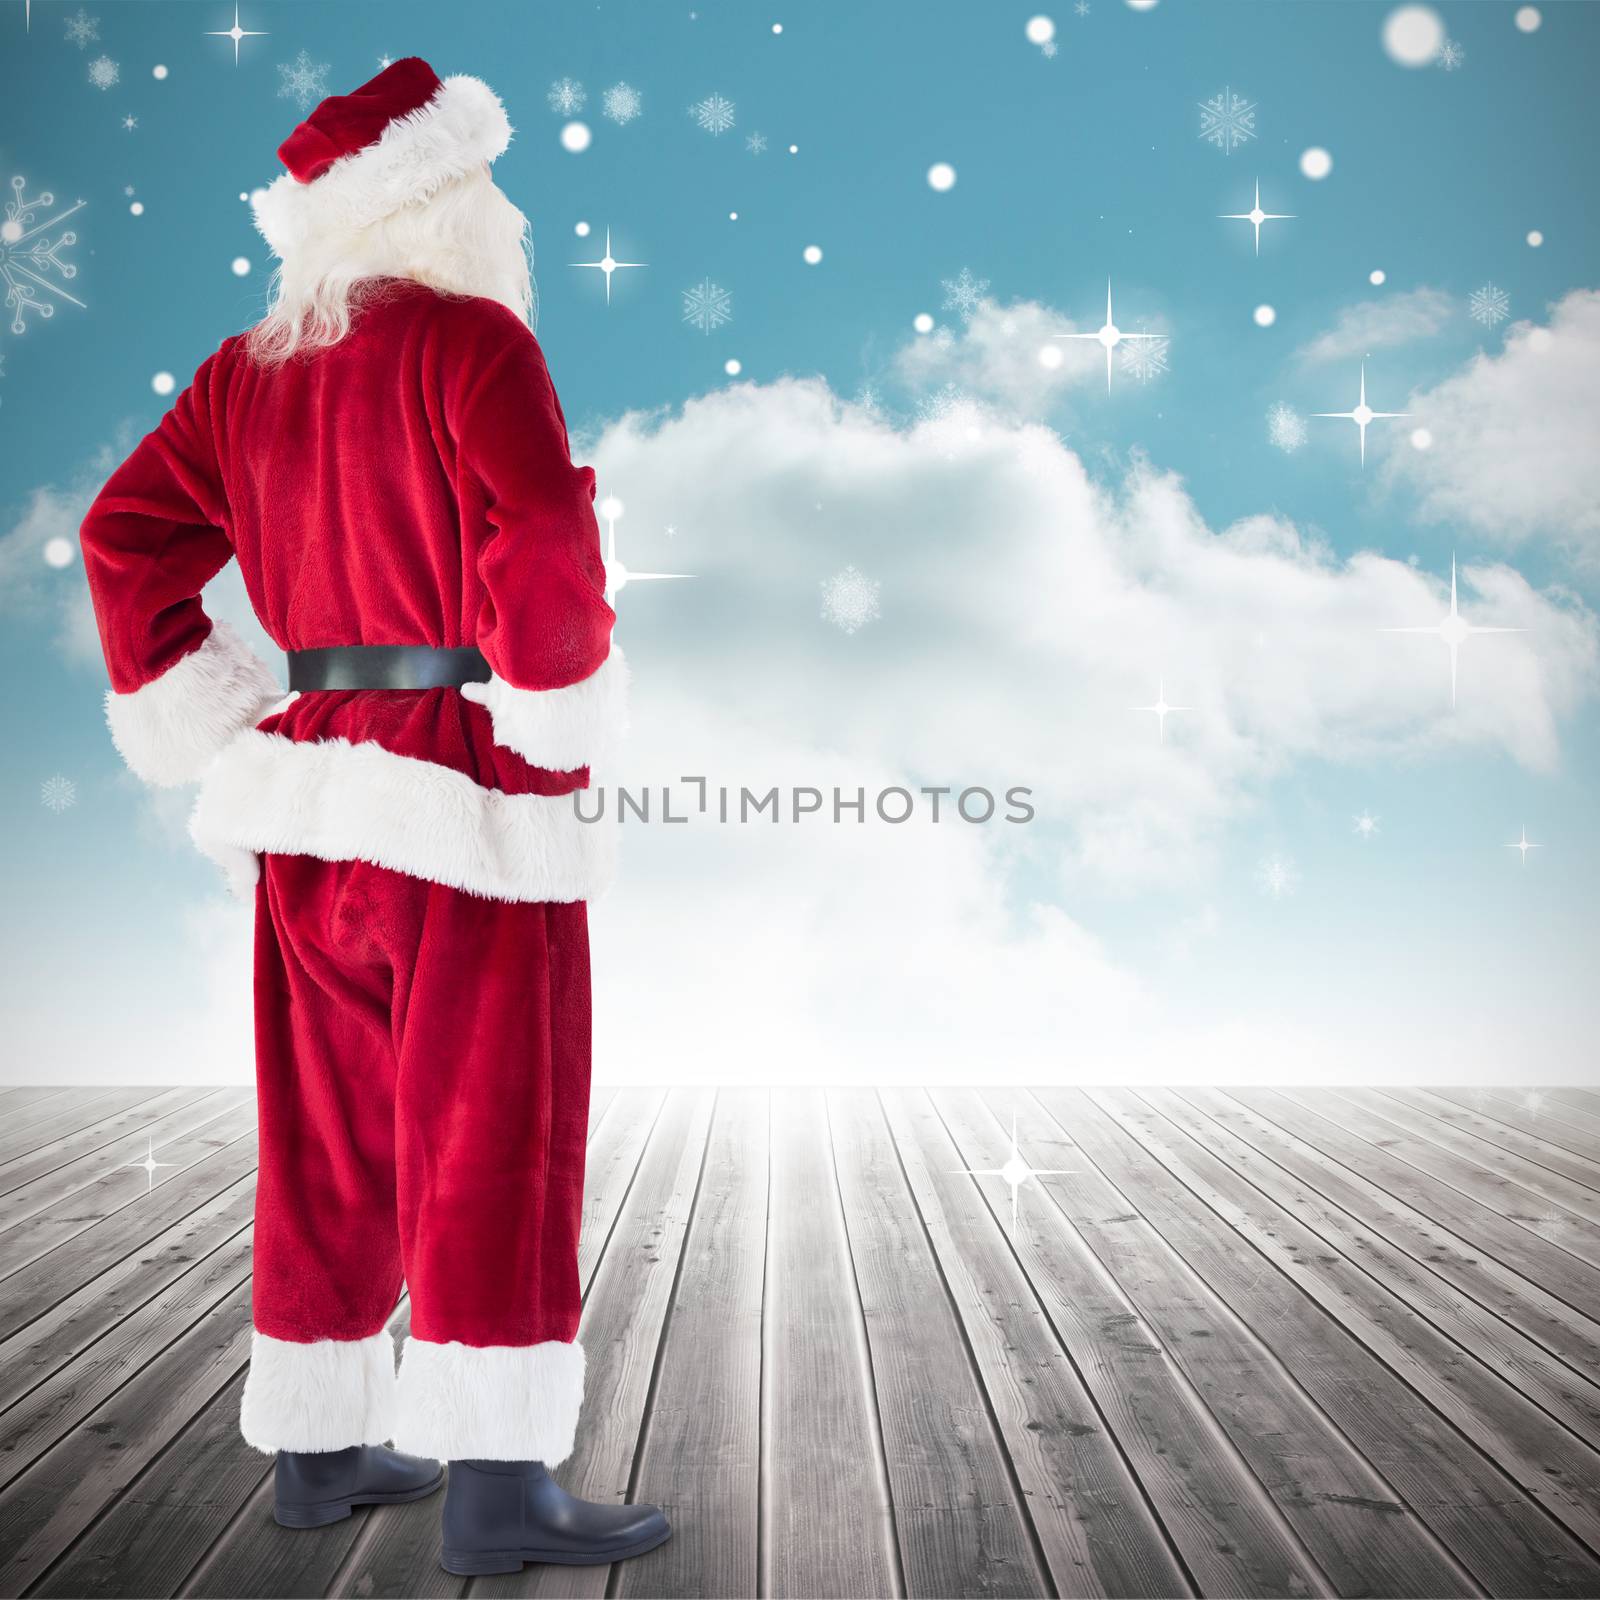 Santa with hands on hips against cloudy sky background